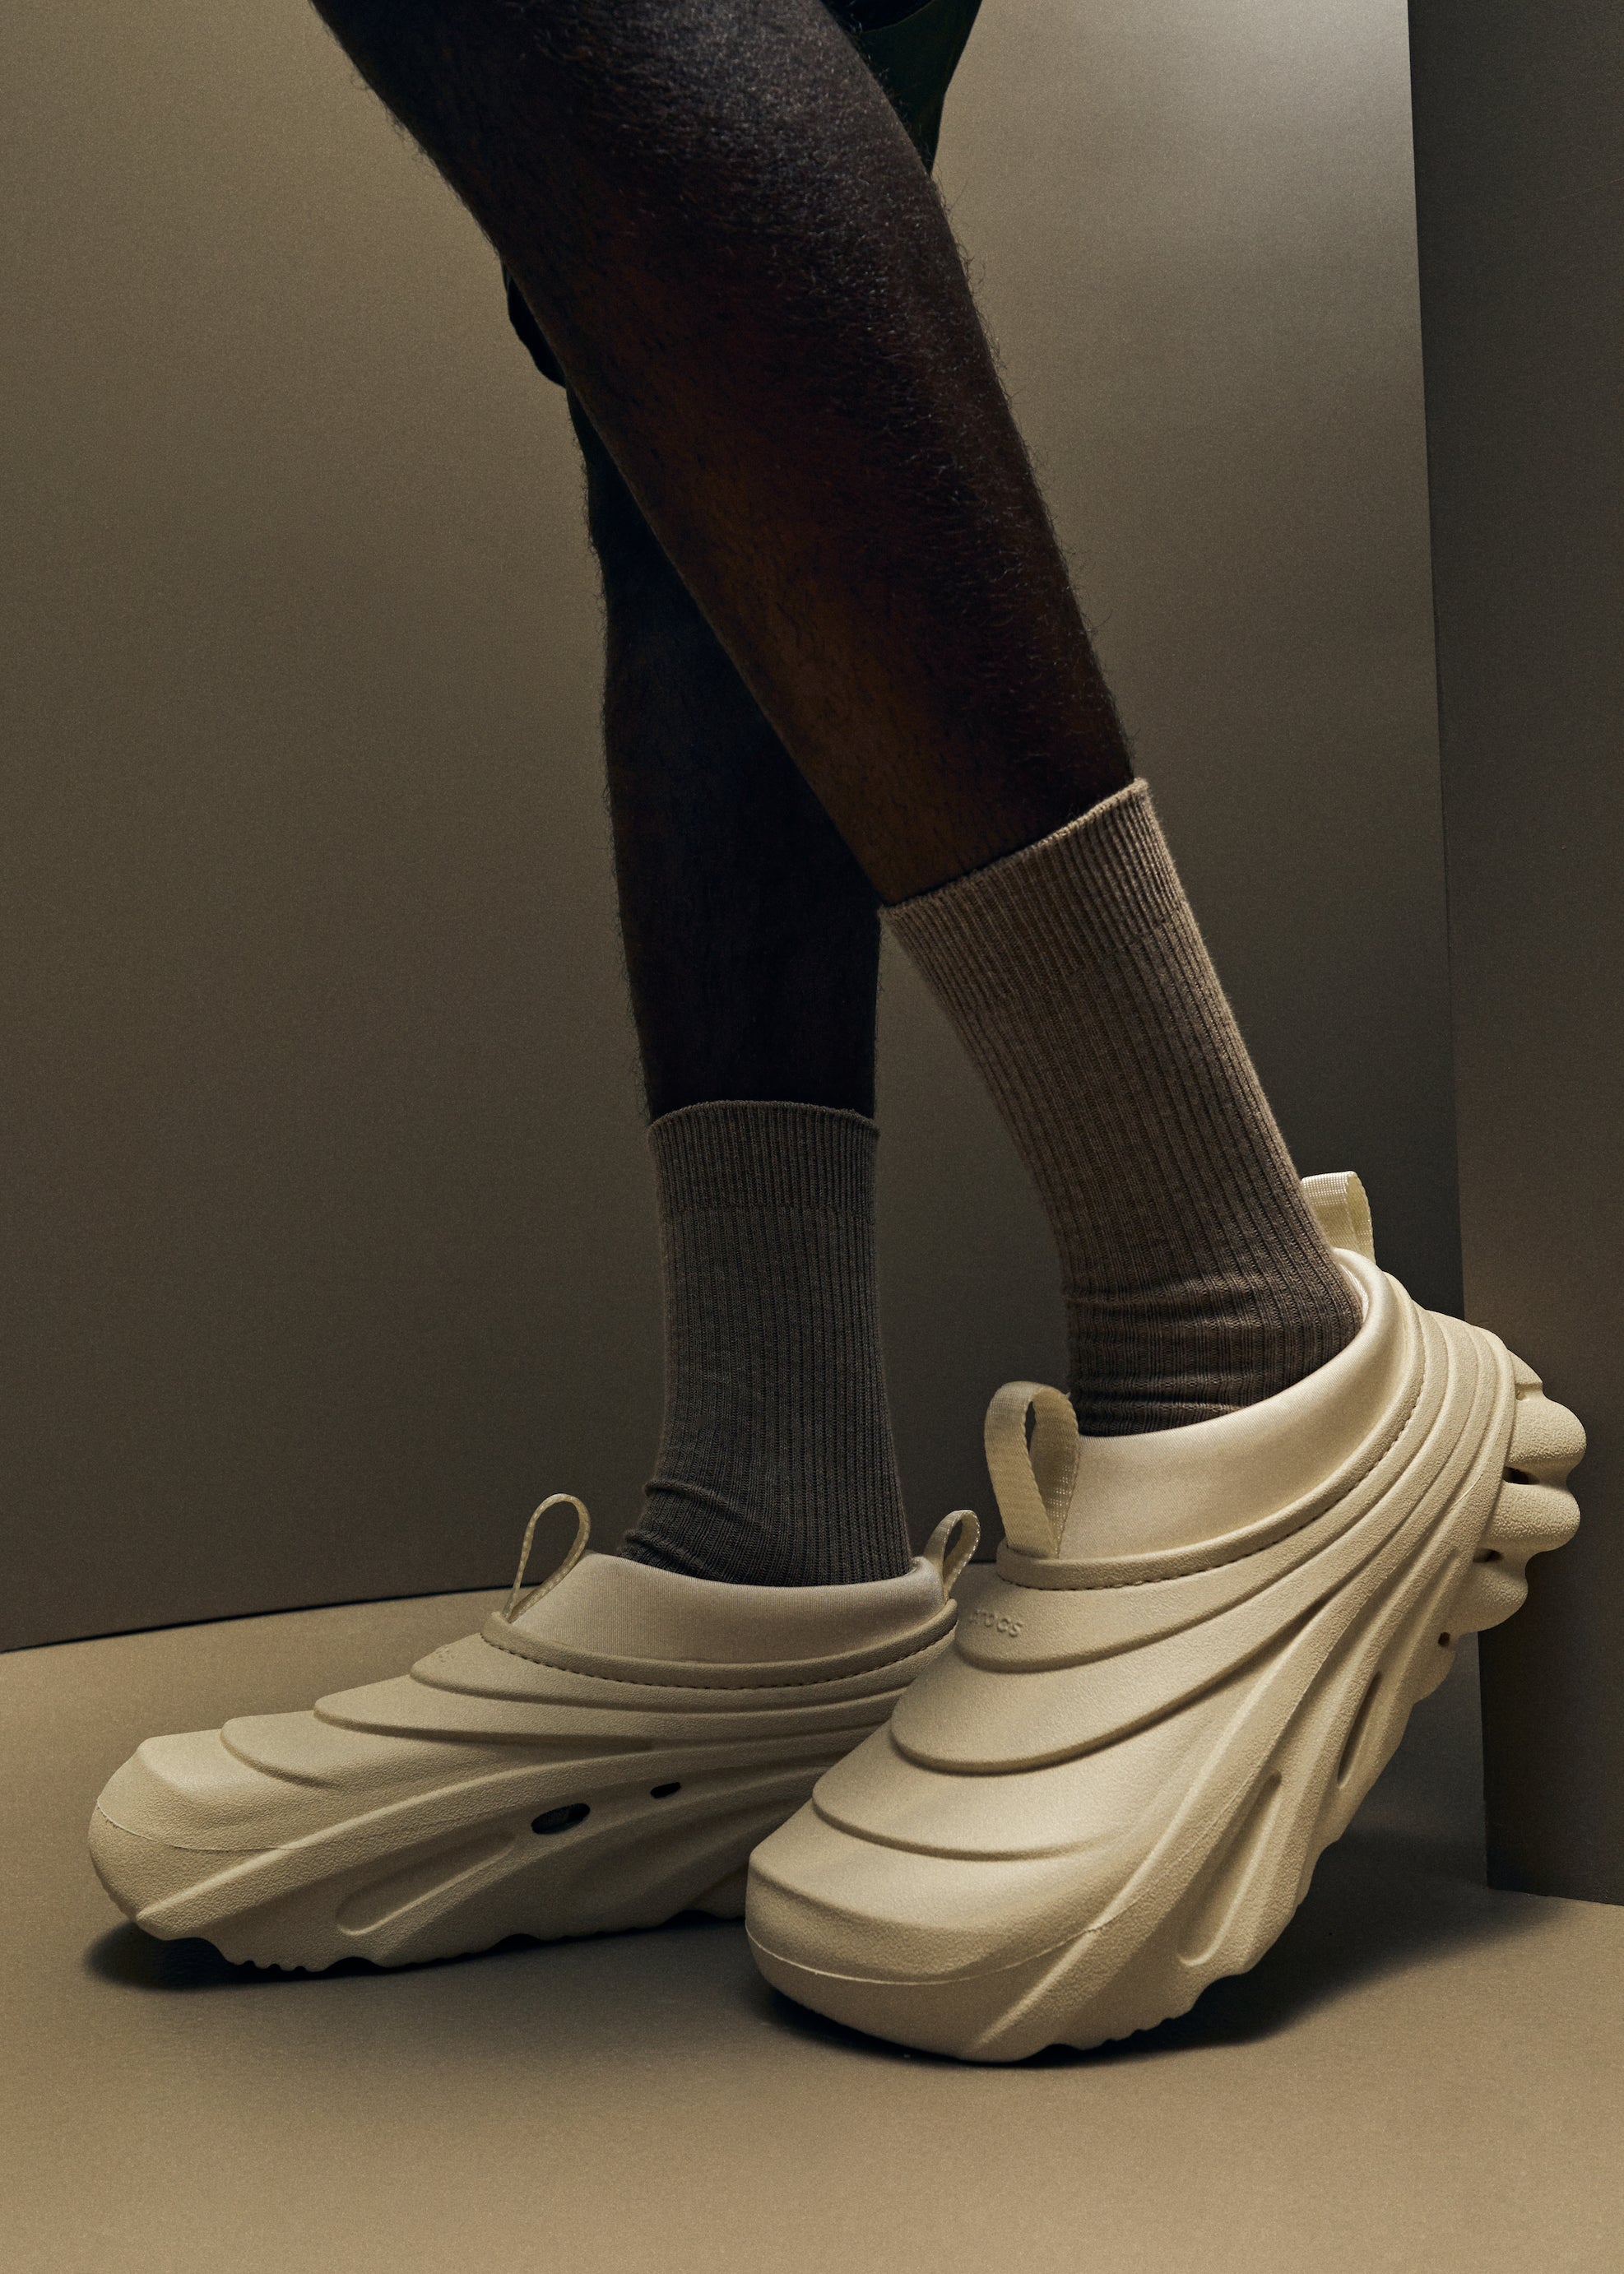 Kith Editorial for Crocs Echo Storm